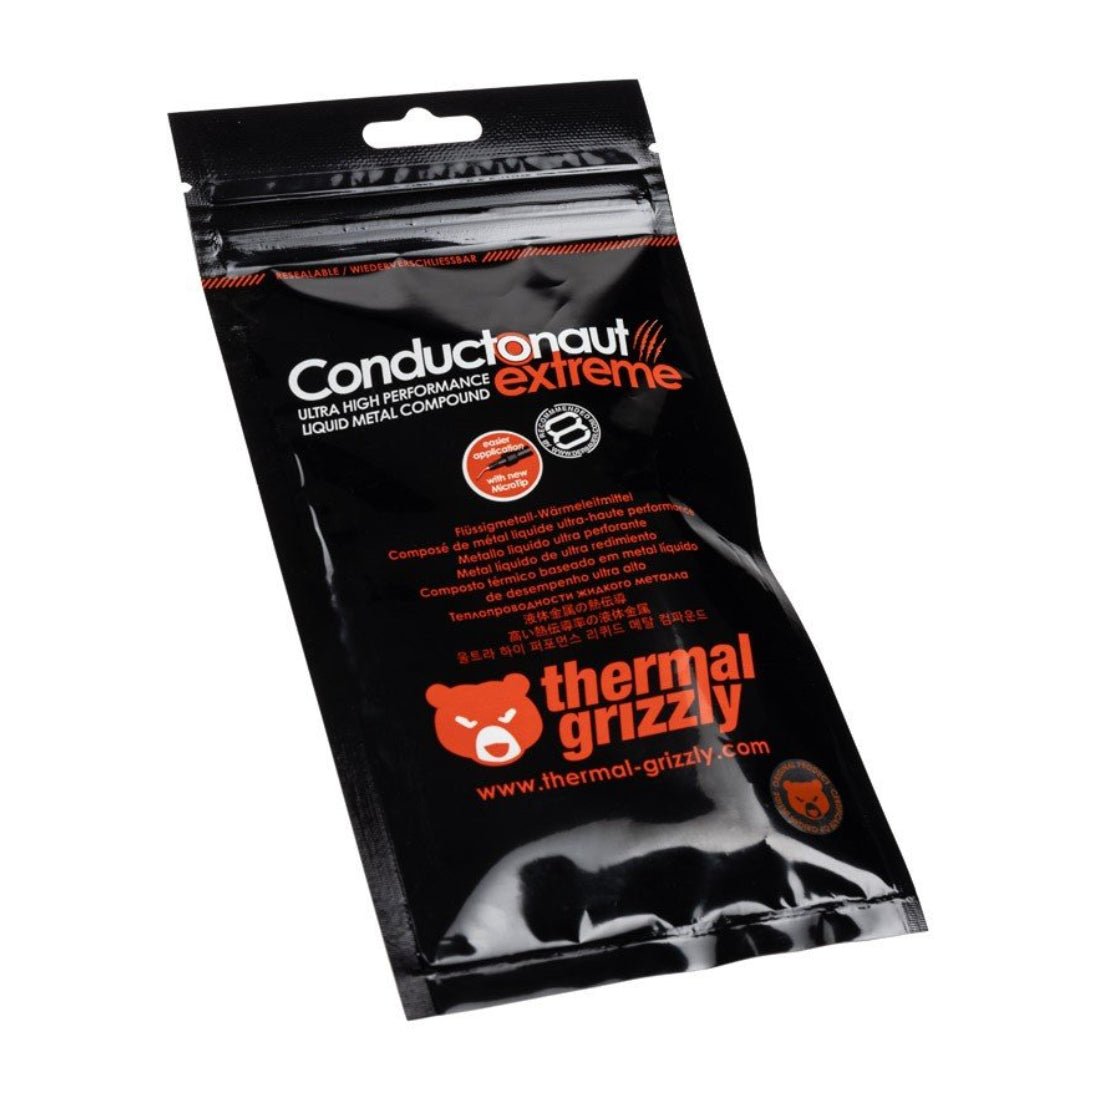 Thermal Grizzly Conductonaut Extreme - 5g - معجون حراري - Store 974 | ستور ٩٧٤